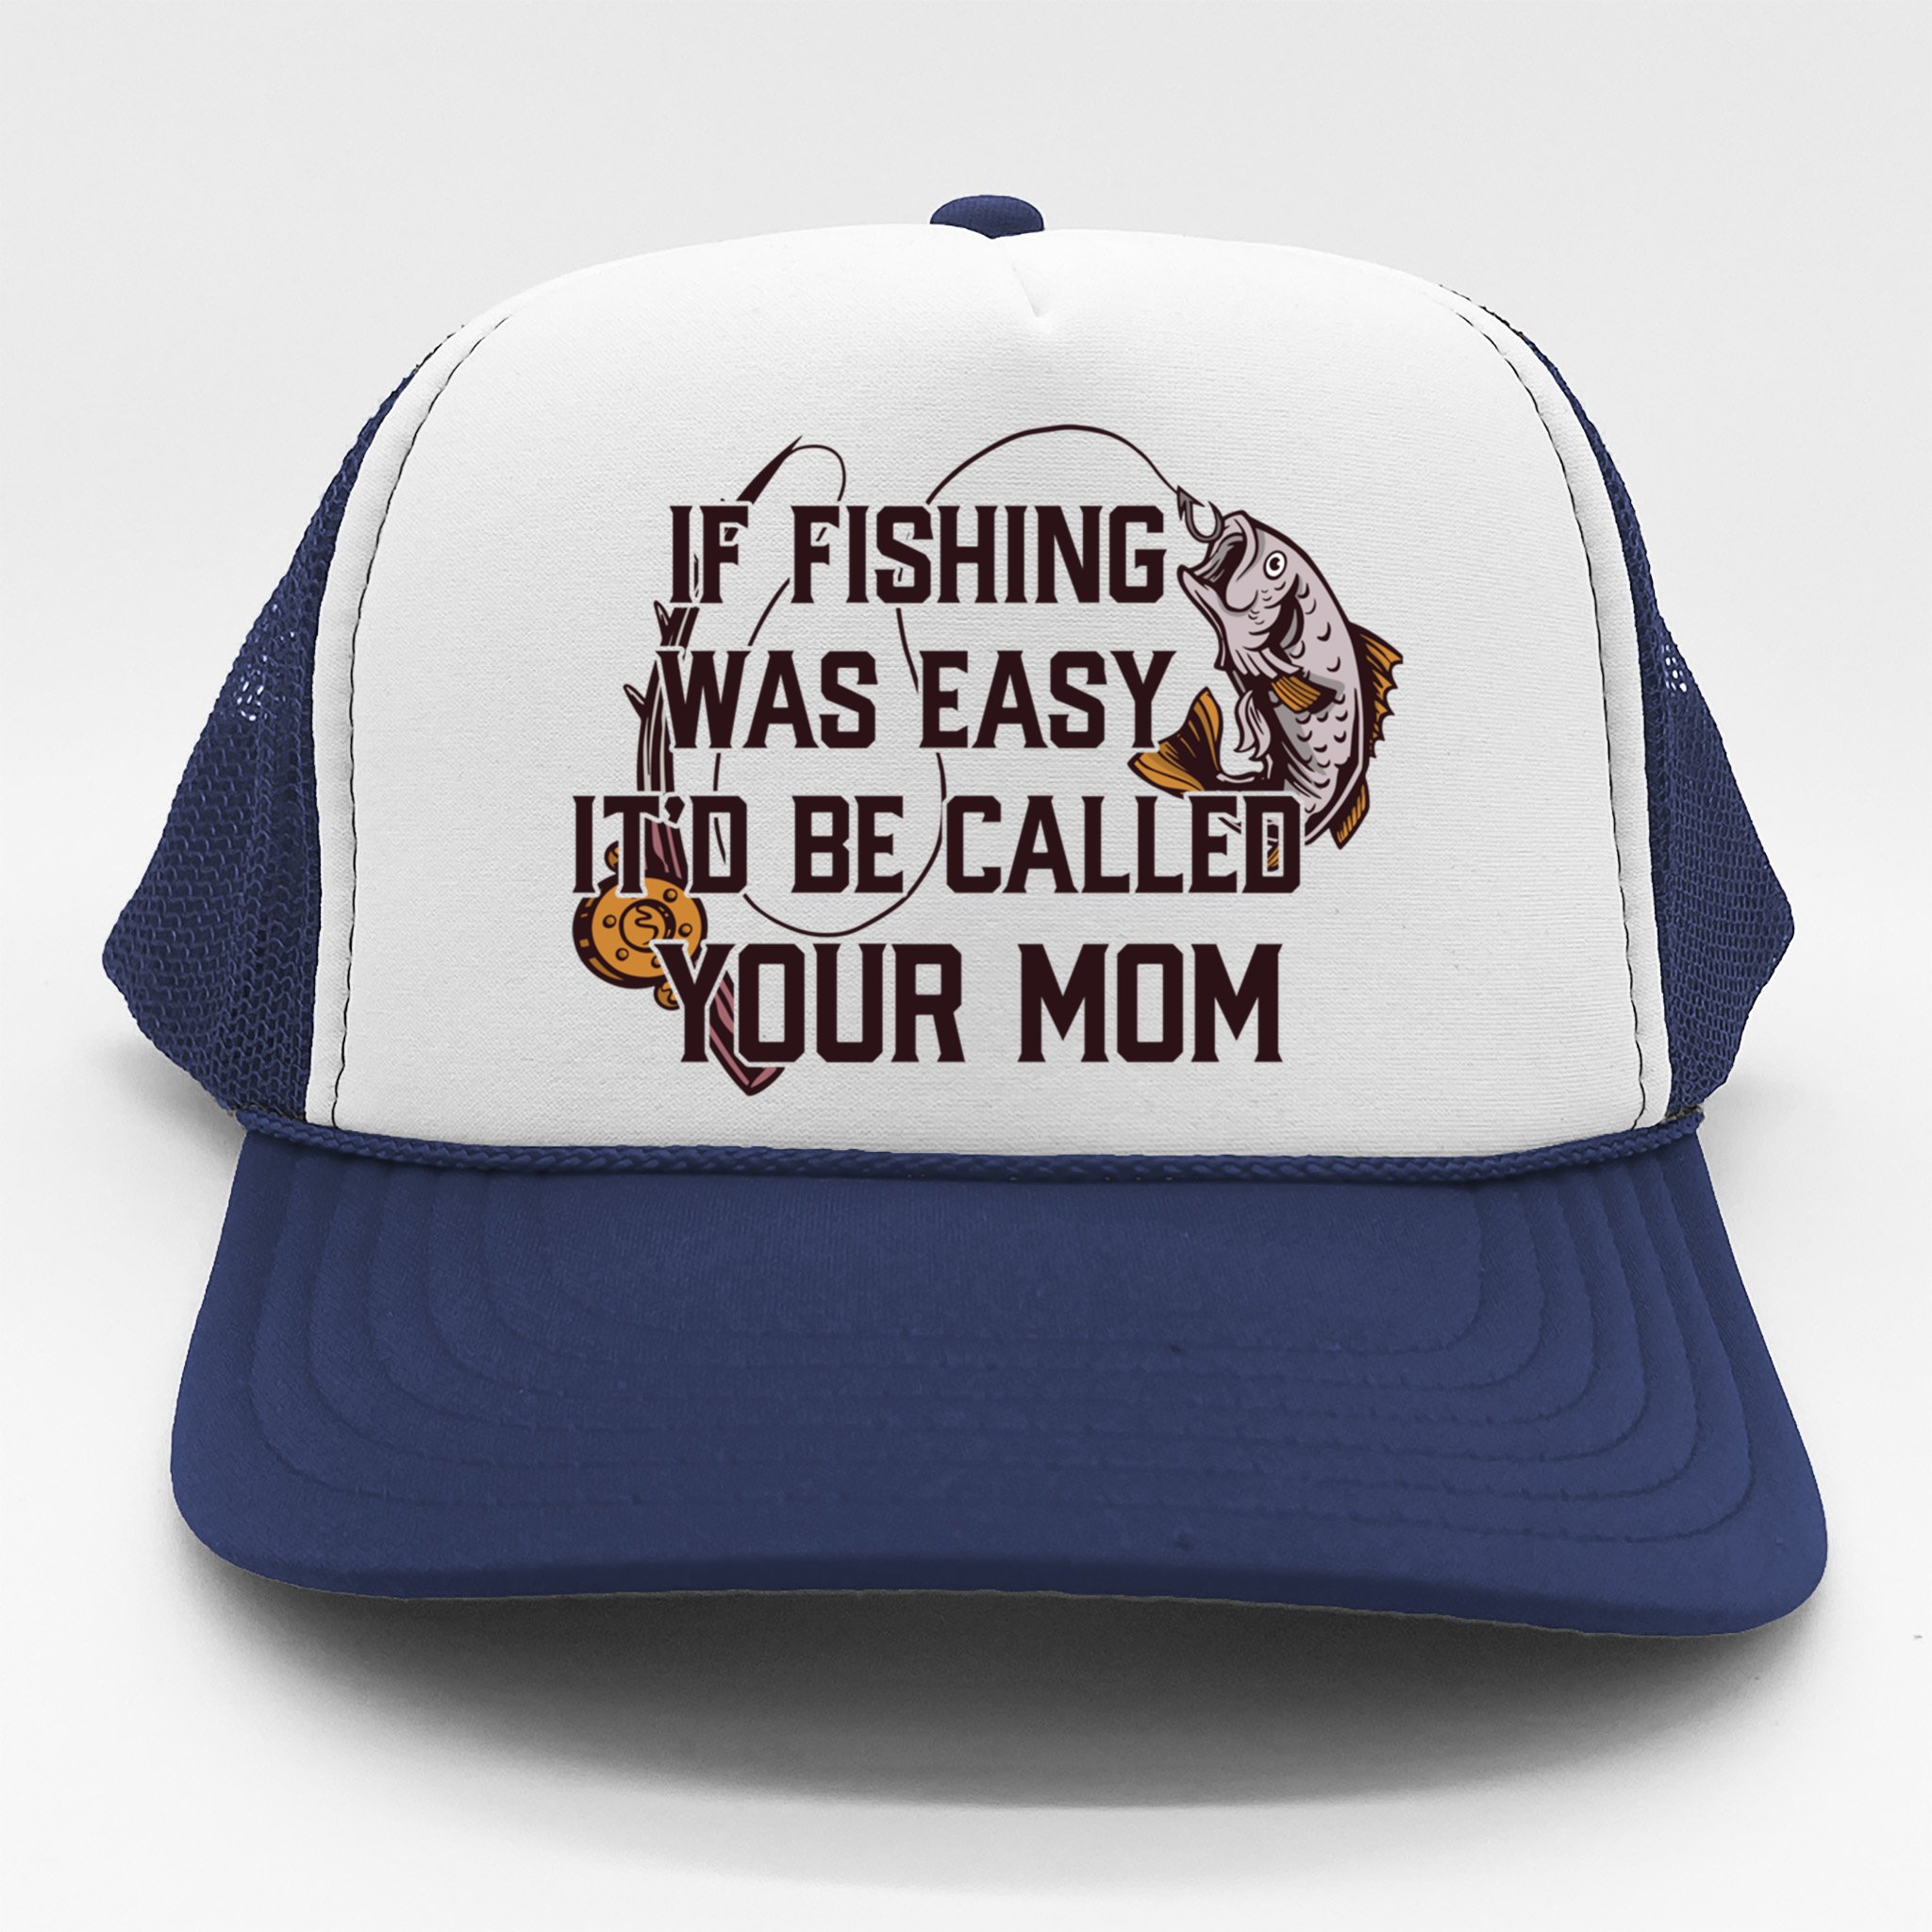 https://images3.teeshirtpalace.com/images/productImages/ifw2535019-if-fishing-was-easy-itd-be-called-your-mom-funny-fish-meme-gift--navy-th-garment.jpg